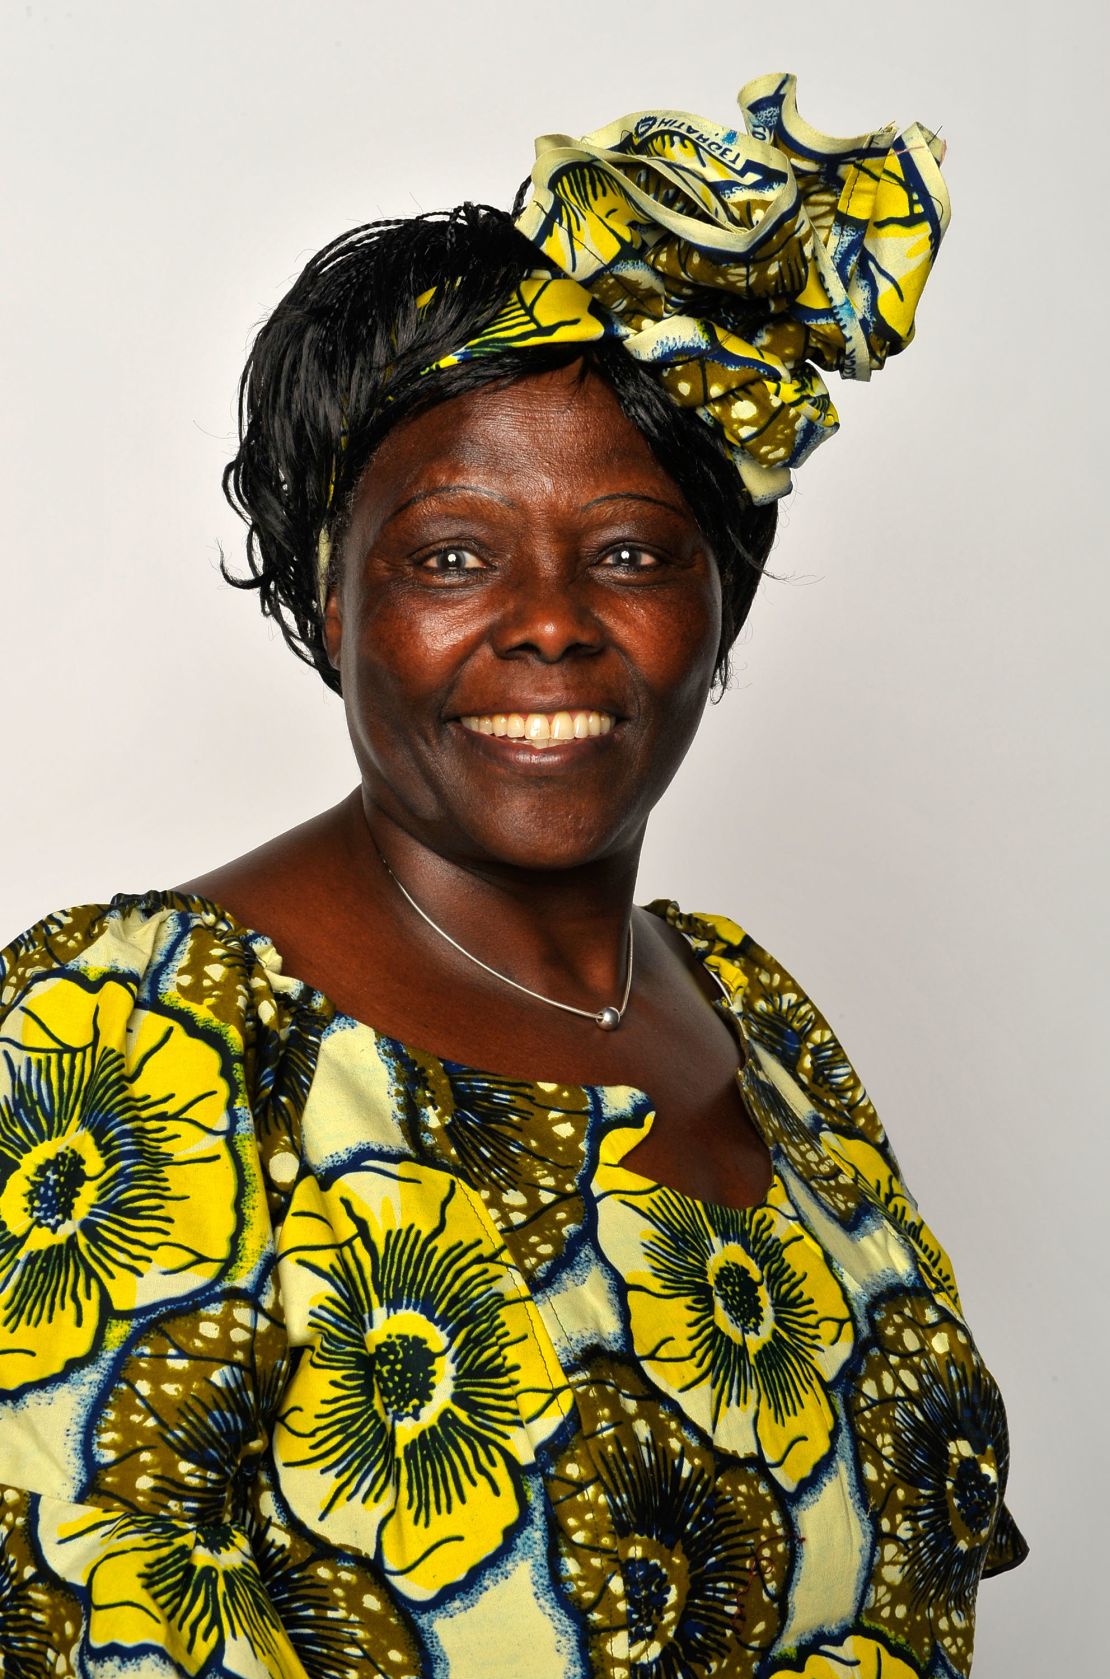 Political activist Dr. Wangari Maathai founded the Green Belt Movement in the 1970s.